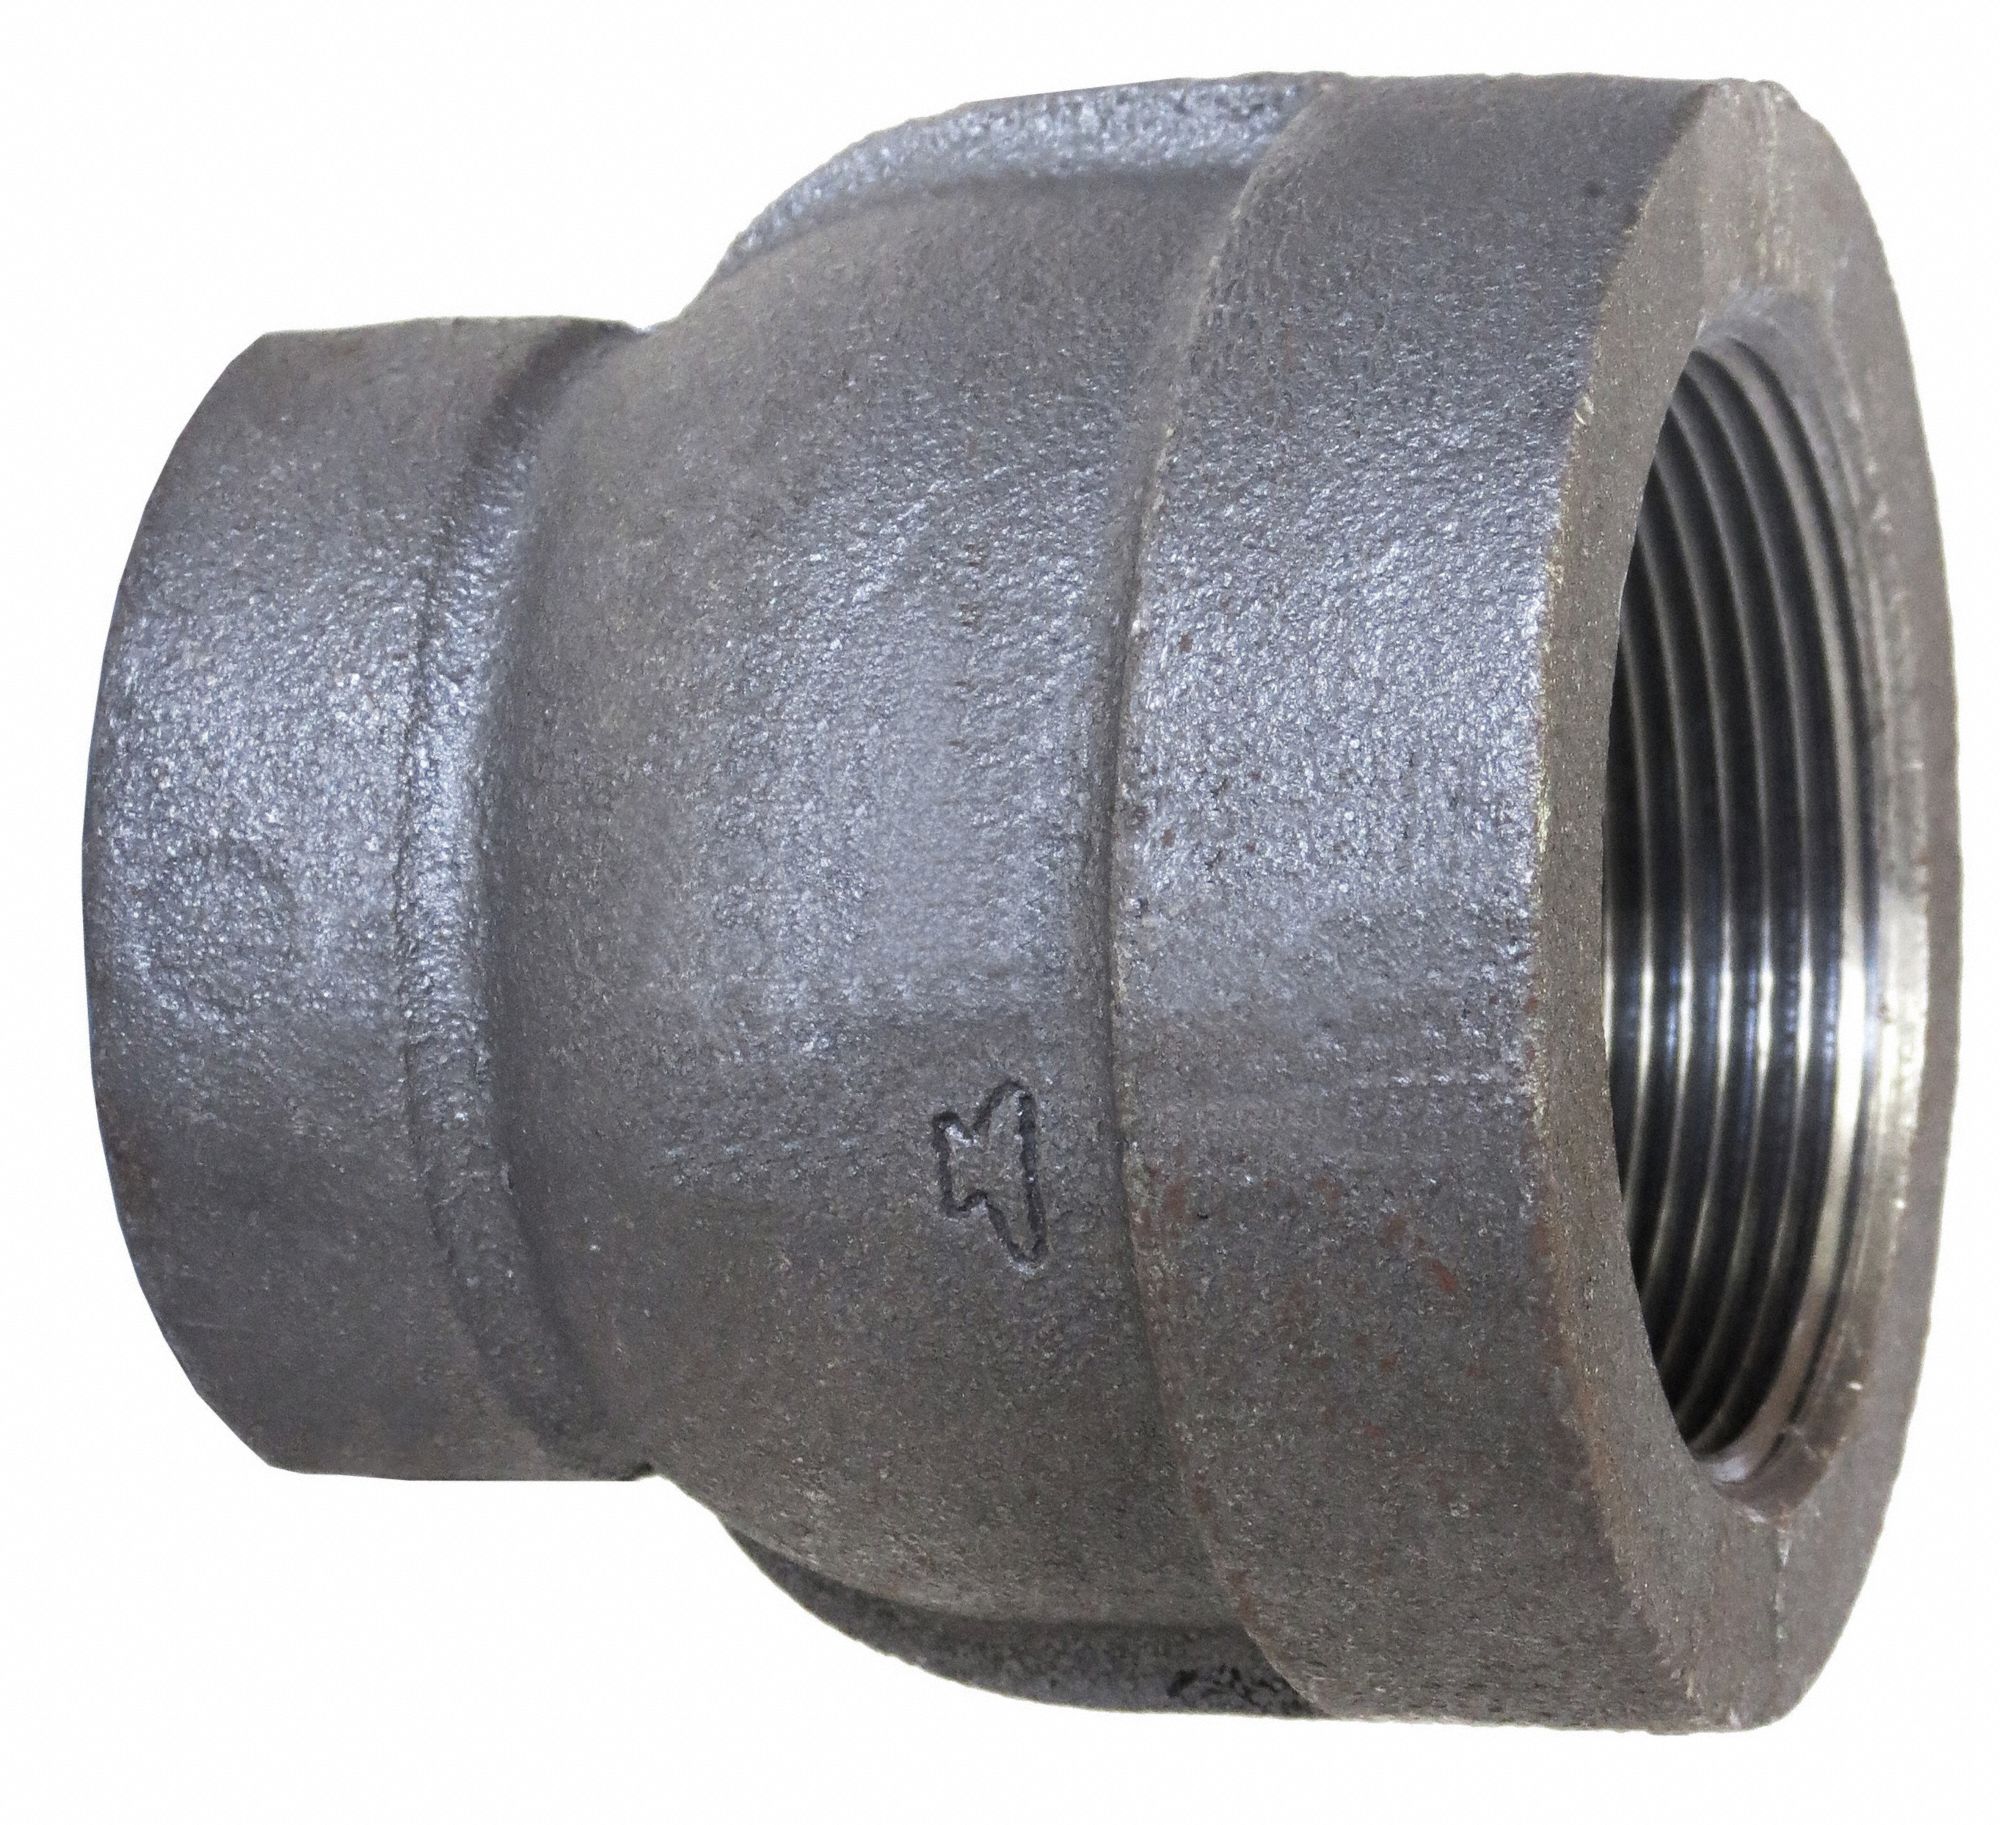 Anvil 8700133609 Galvanized Malleable Iron Coupling 3/4 in NPT Female 